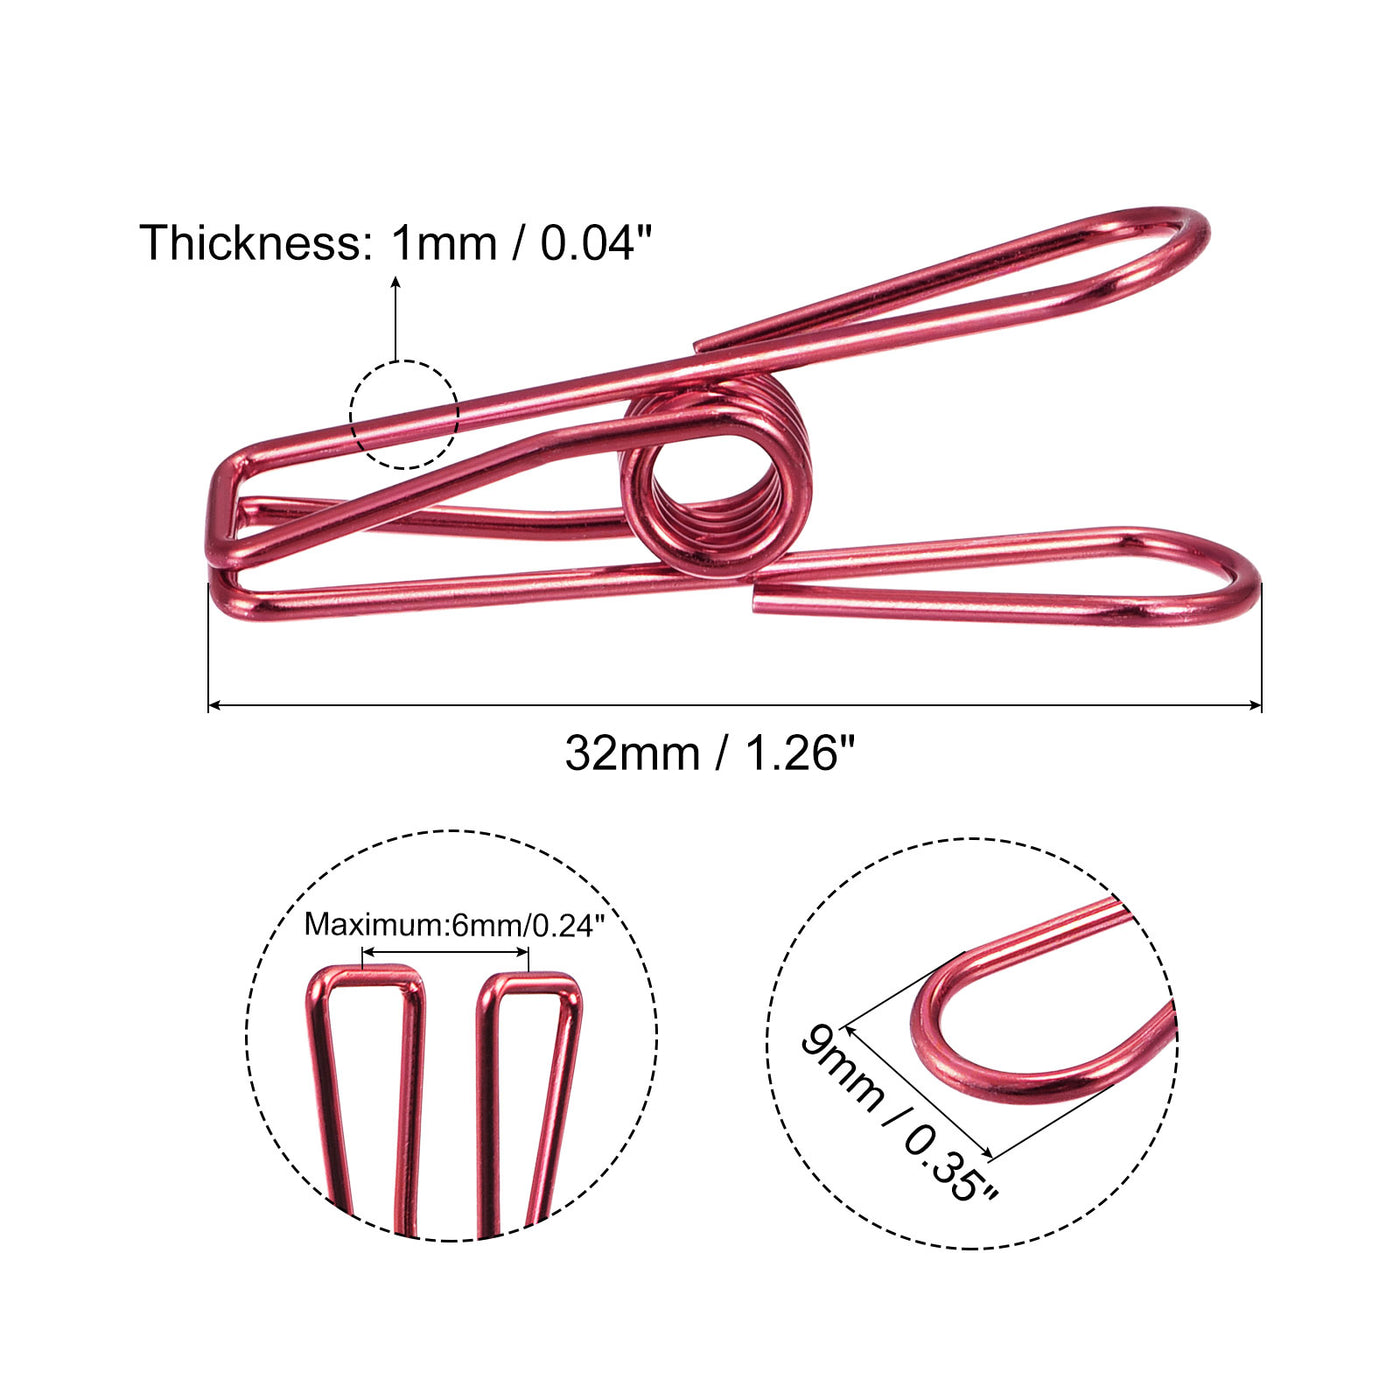 uxcell Uxcell Tablecloth Clips, 32mm Carbon Steel Clamps for Fixing Table Cloth, Red 8 Pcs